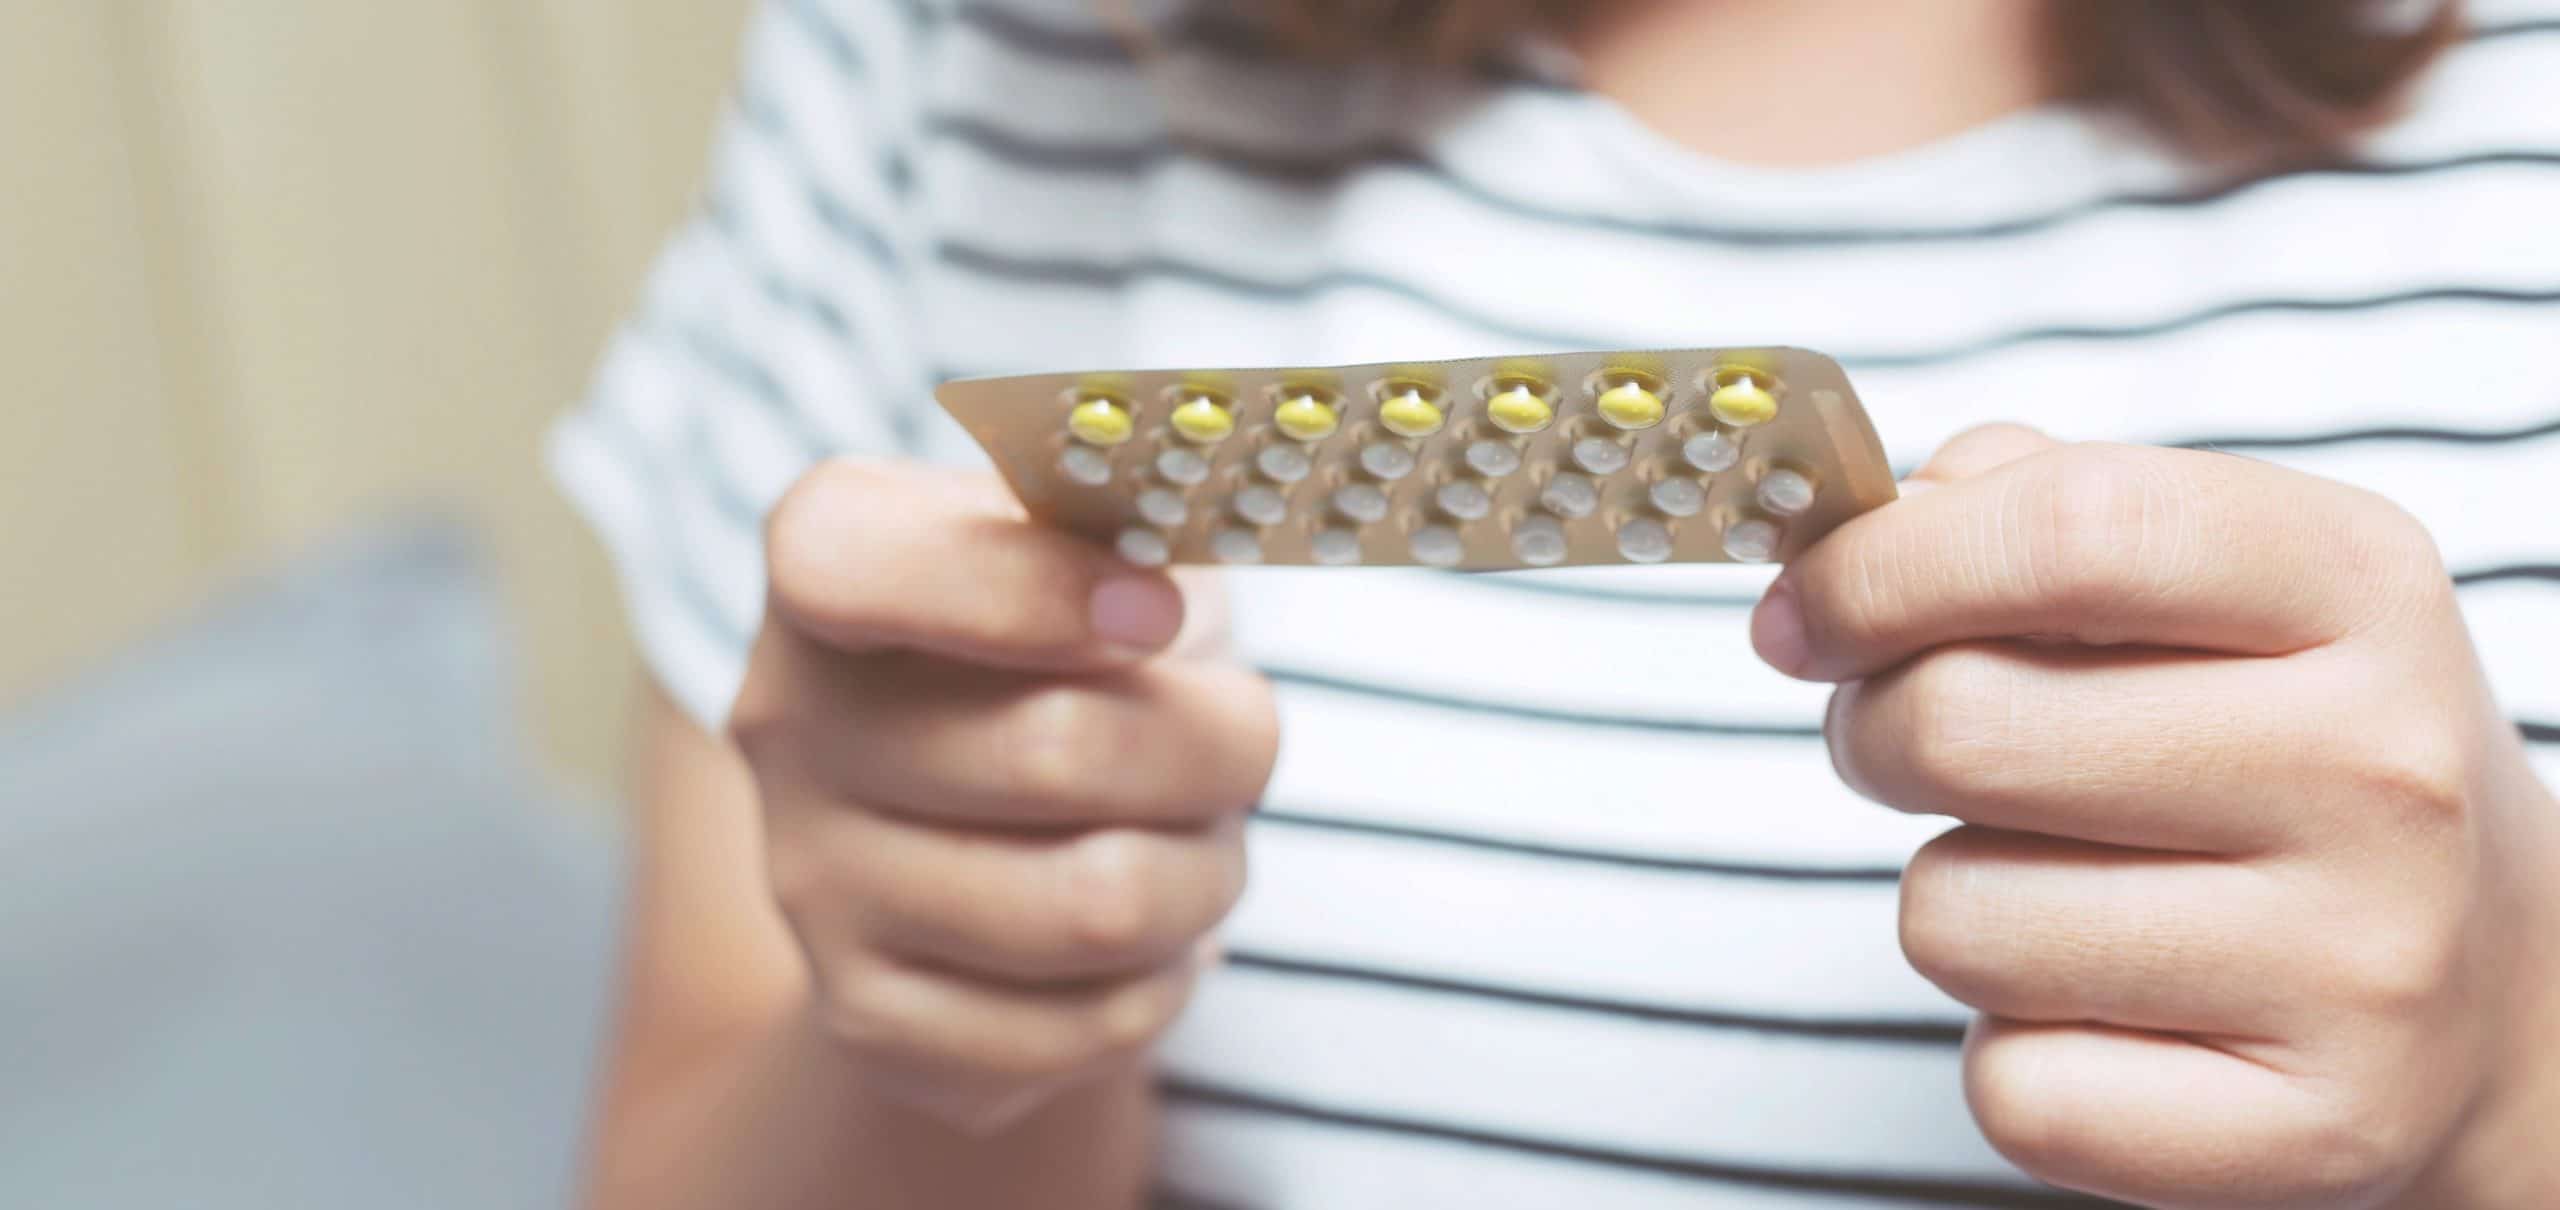 woman holding packet of birth control pills